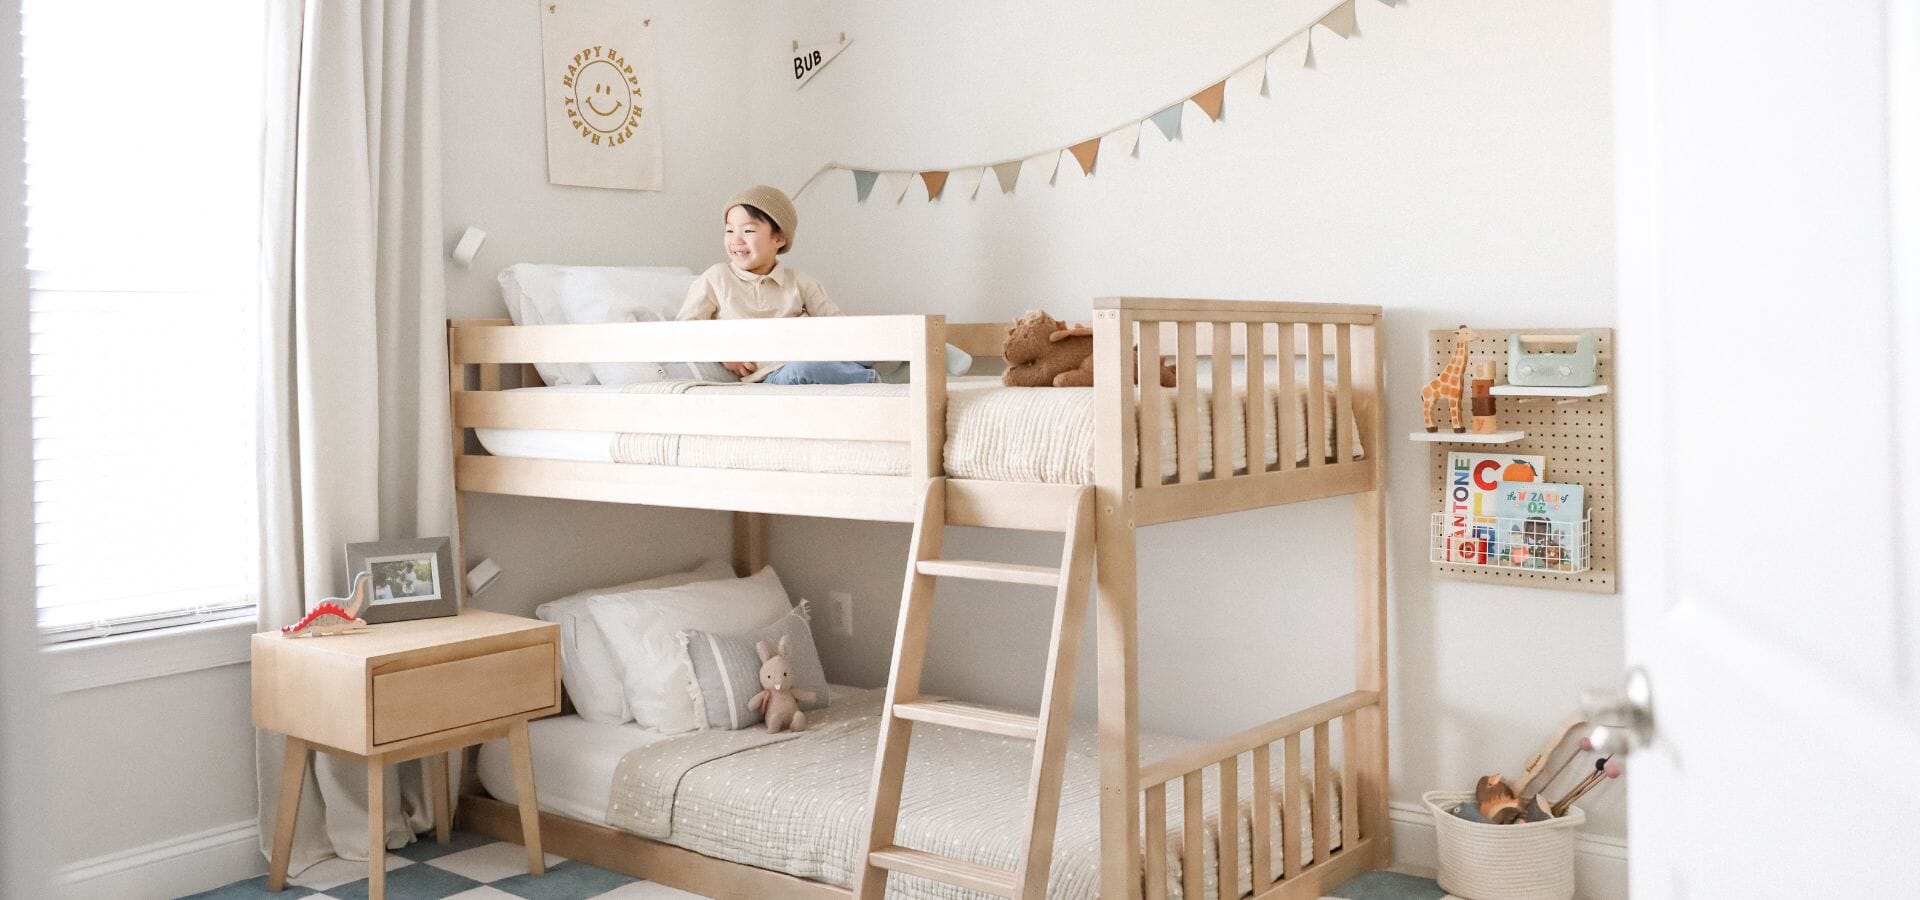 Bunk Beds vs. Loft Beds: Which Bed Is Best for Your Child?